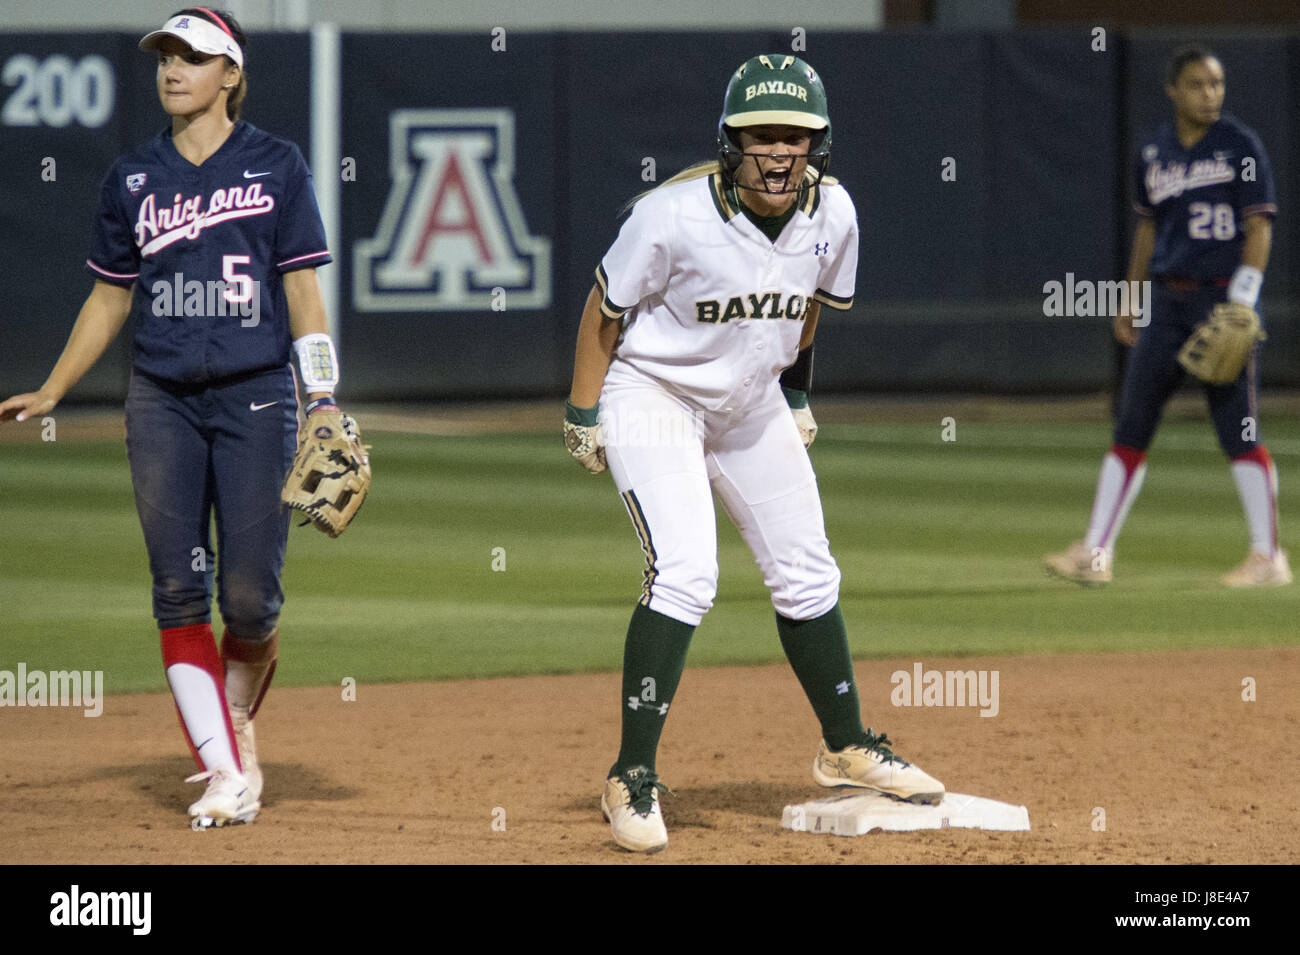 Tucson, Arizona, USA. 27th May, 2017. Baylor TAYLOR ELLIS (3) yells after hitting 2 run RBI to take the lead 6-4 against Arizona during the NCAA Women's College World Series Super Regional Tournament on Saturday, May 27, 2017, at Rita Hillenbrand Memorial Stadium in Tucson, Arizona. Baylor won game two of a best of three game series 6-4 against Arizona of the Super Regionals in the Women's College World Series. Credit: Jeff Brown/ZUMA Wire/Alamy Live News Stock Photo